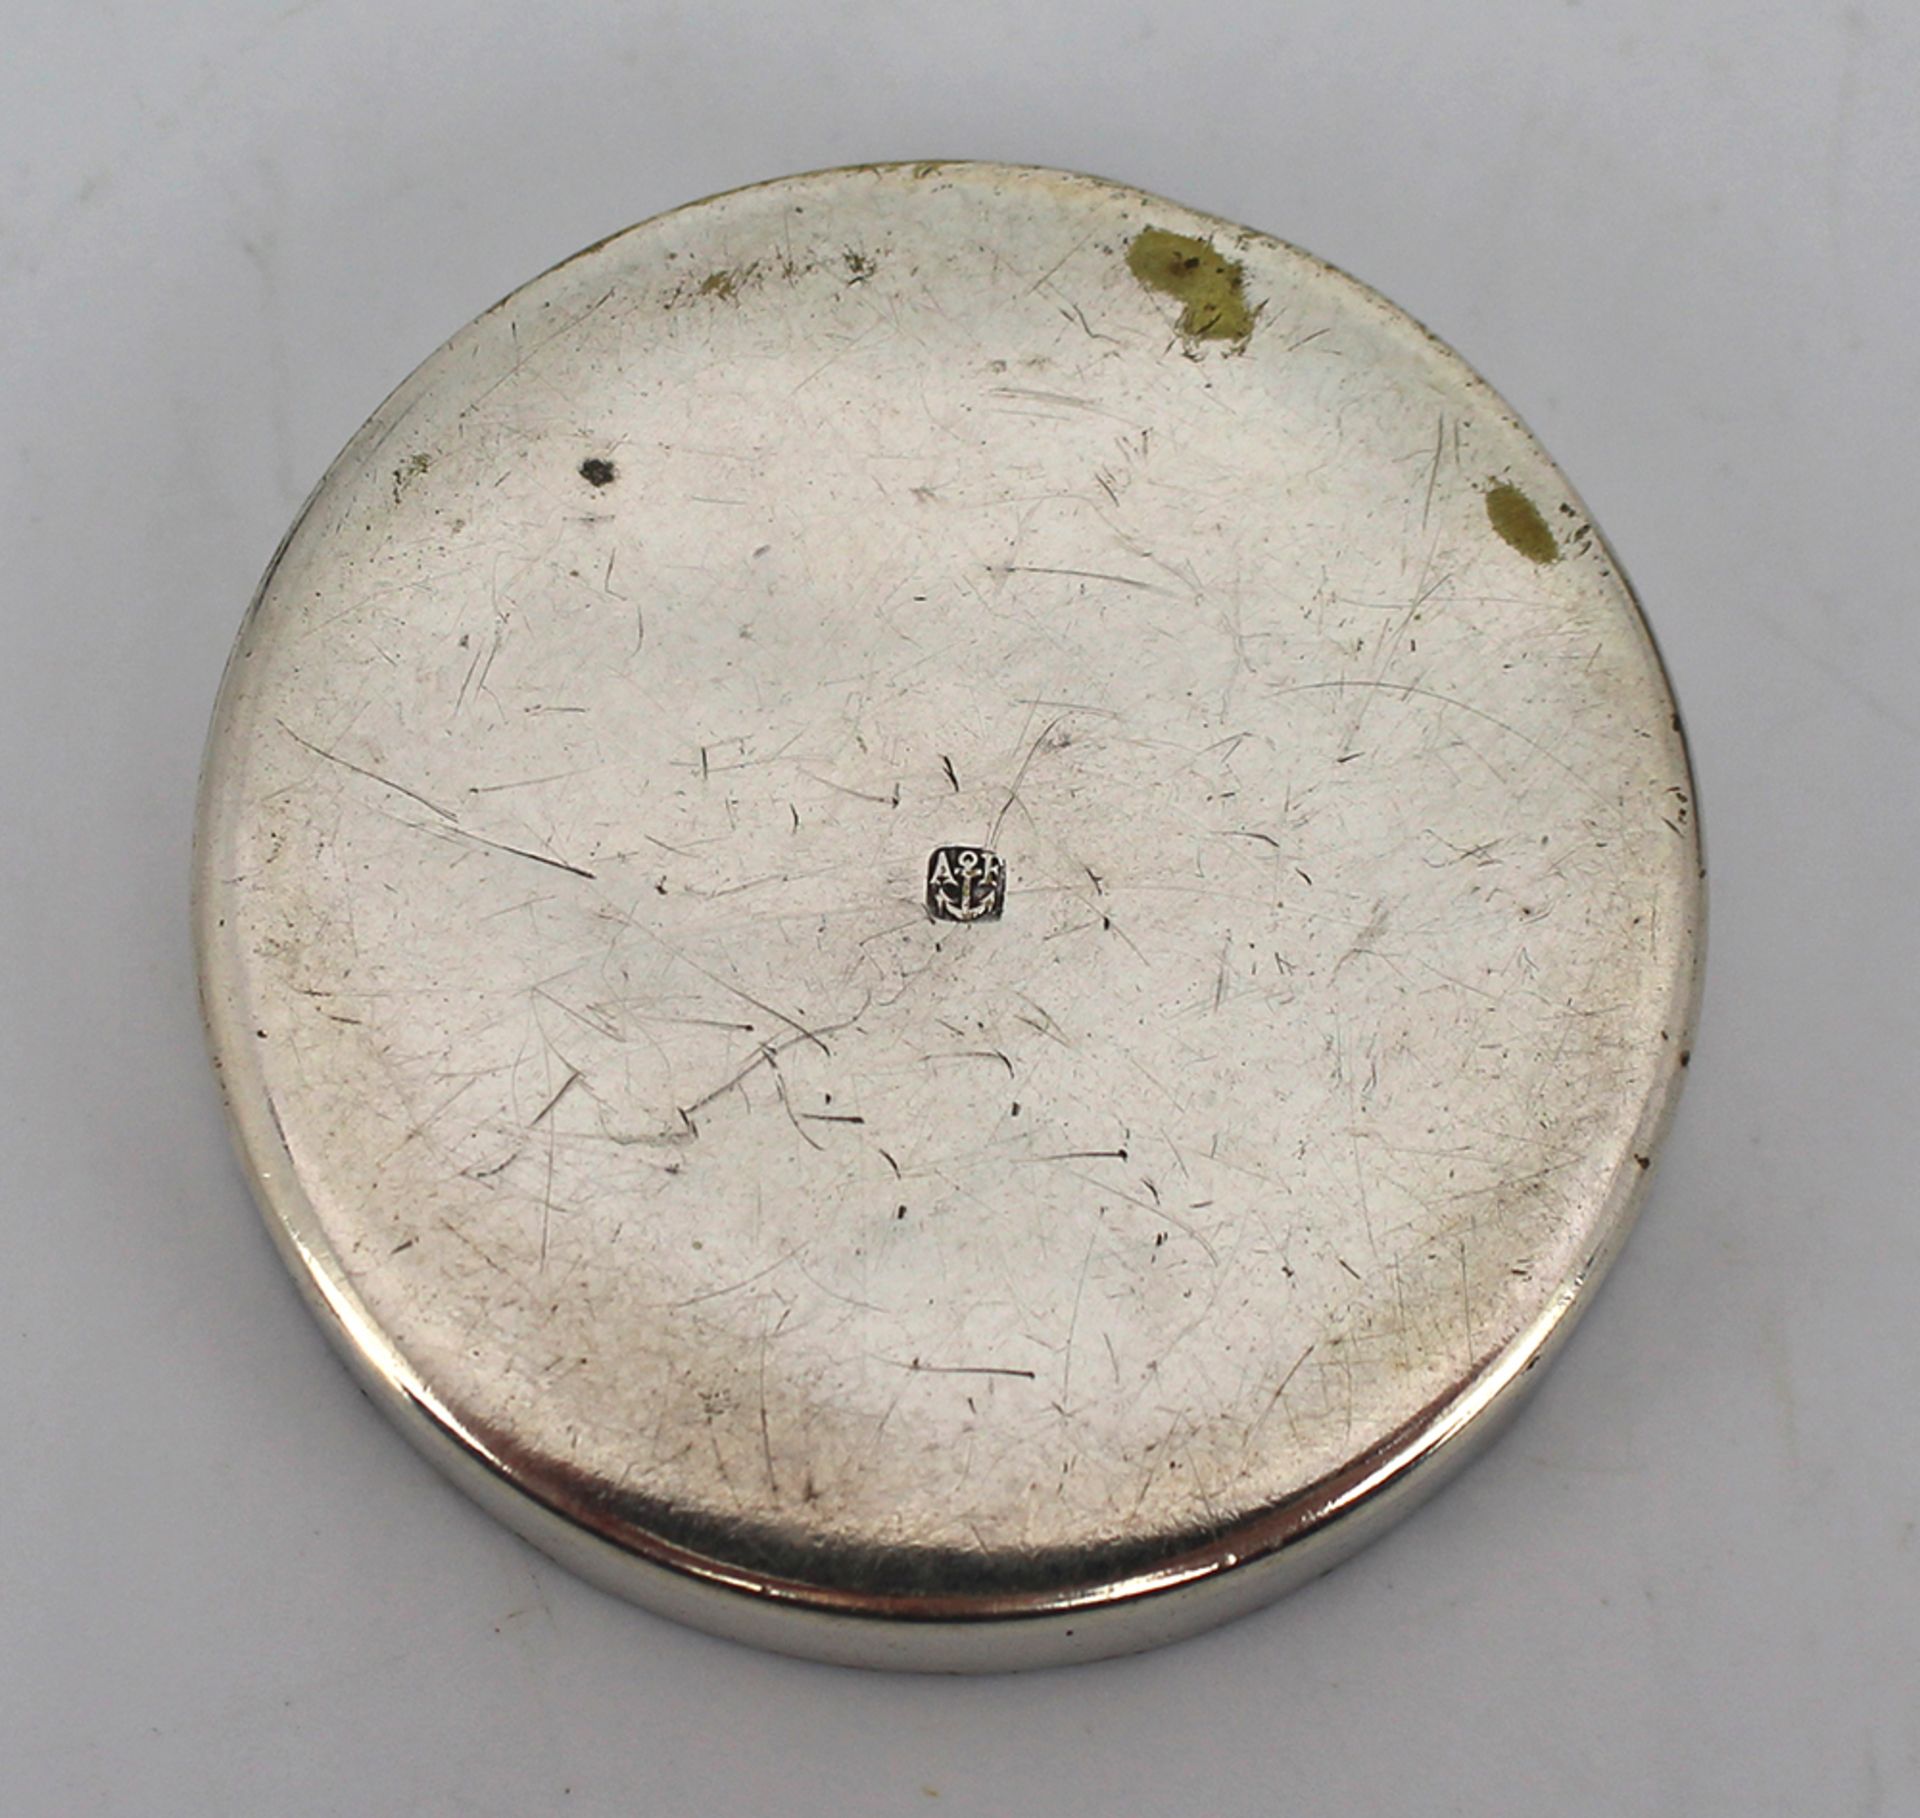 Art Nouveau Silver Plated Pill Box By Armand Frenais French c.1900 - Image 6 of 6